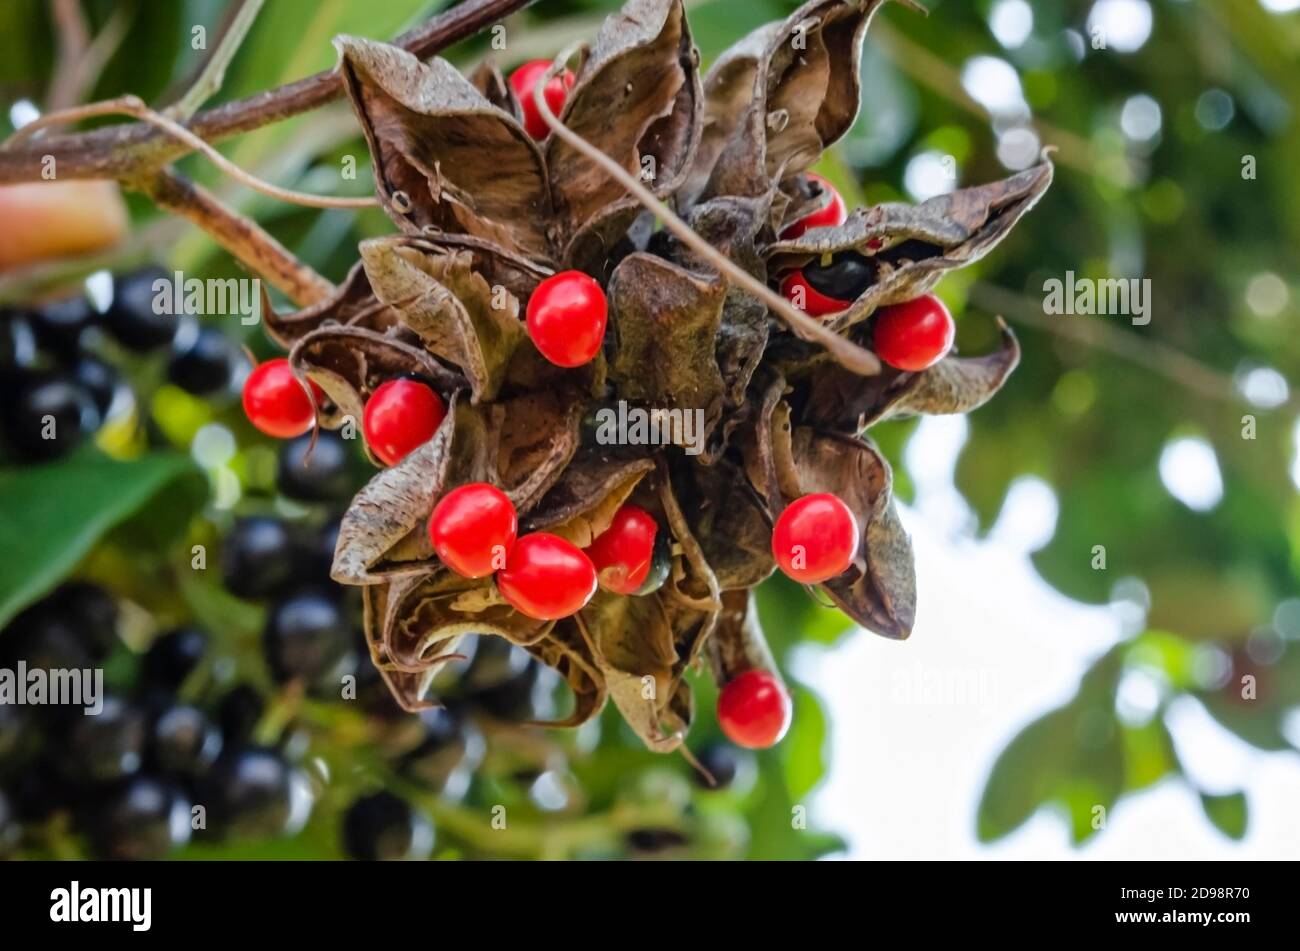 High up in a Pimento tree is a bunch of Abrus Precatorius bean pods that are open with the round black and red seeds still attached. The beans are com Stock Photo